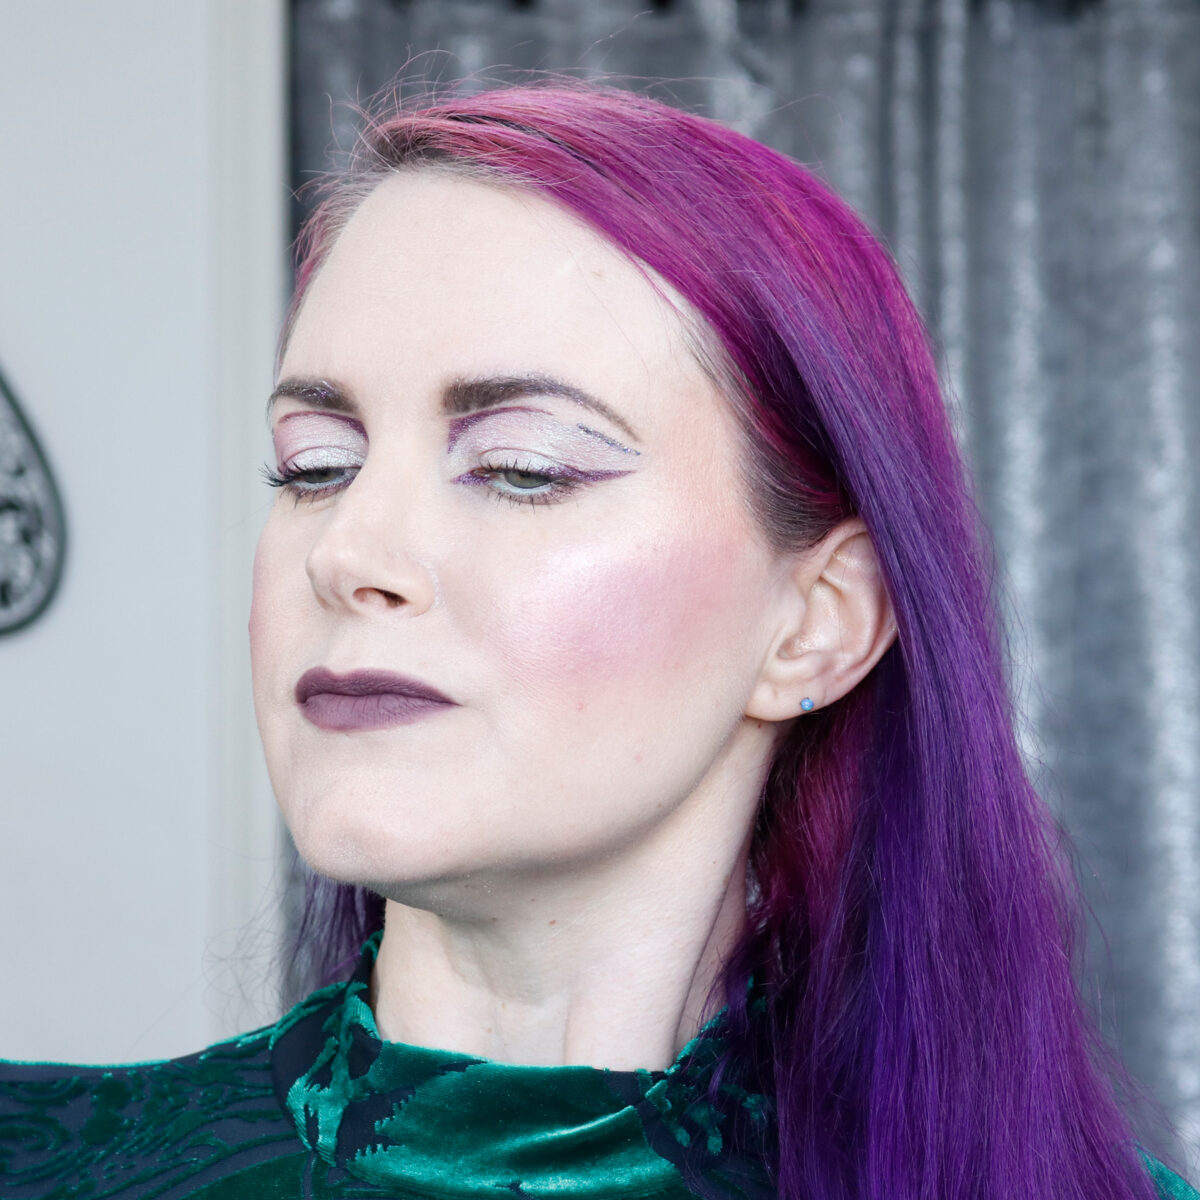 Cordelia is wearing purple blush with her graphic makeup look on hooded eyes